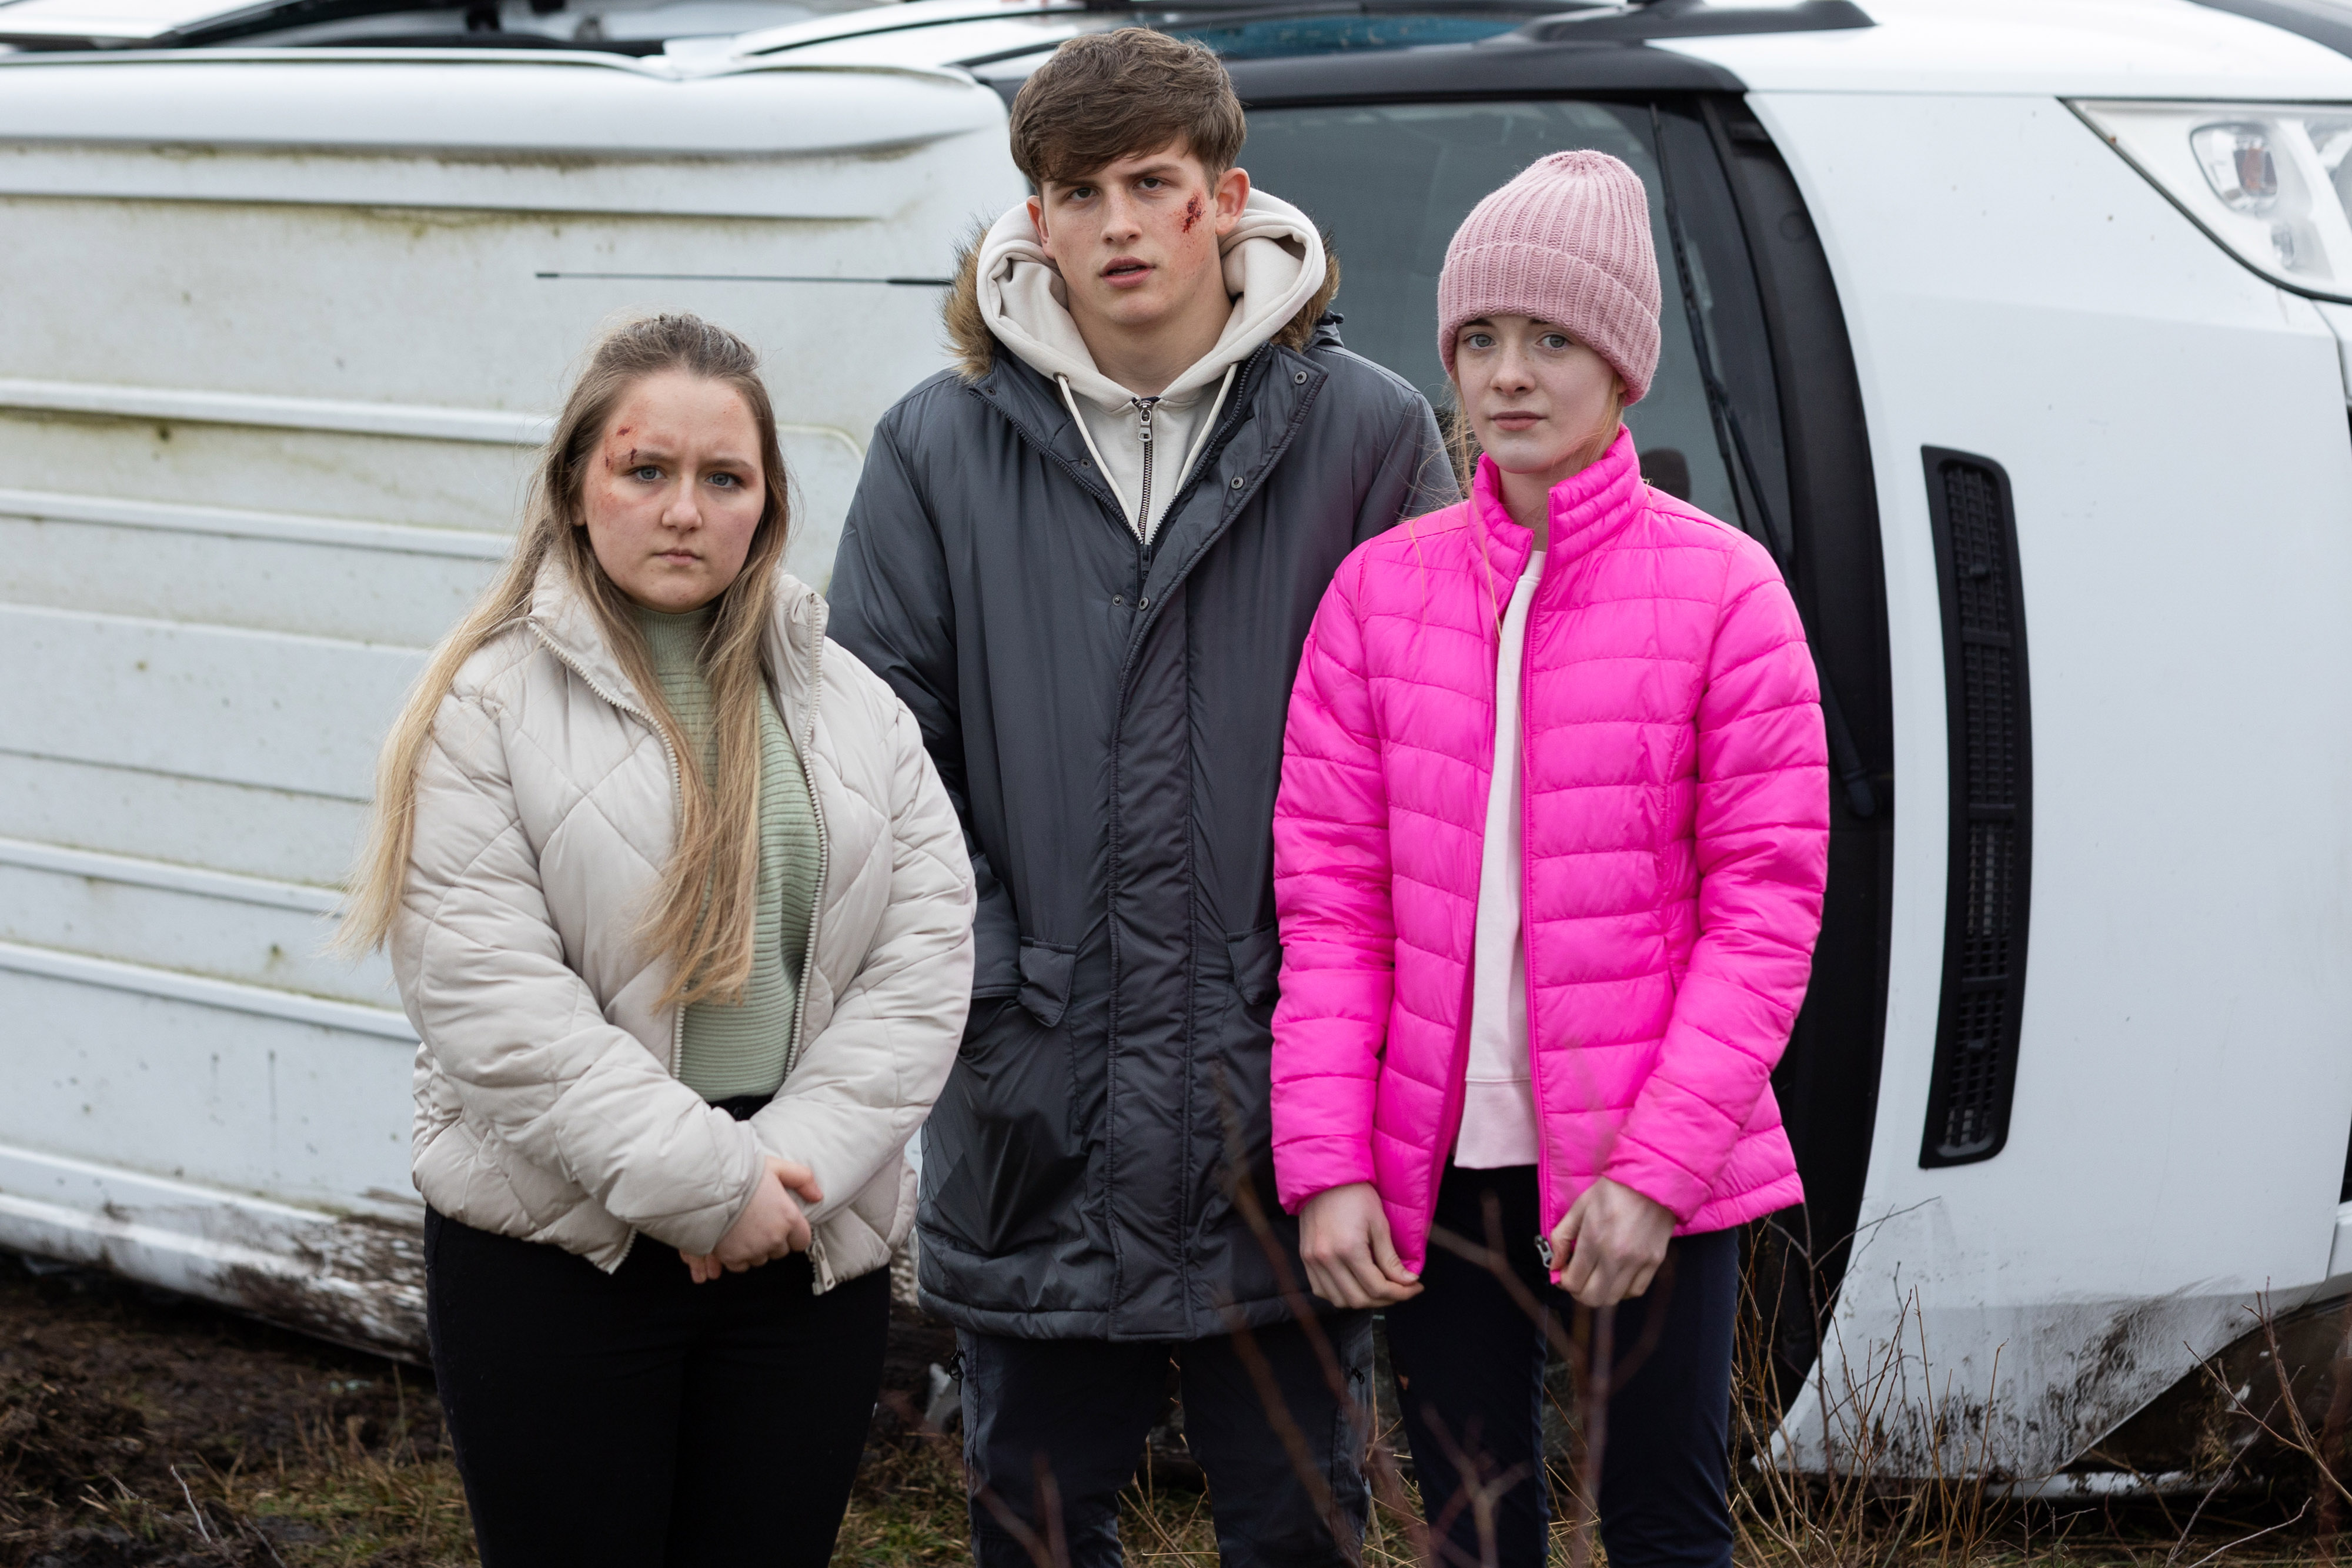 Pupils Leah, Charlie and Ella were all inside the minibus when it crashed.